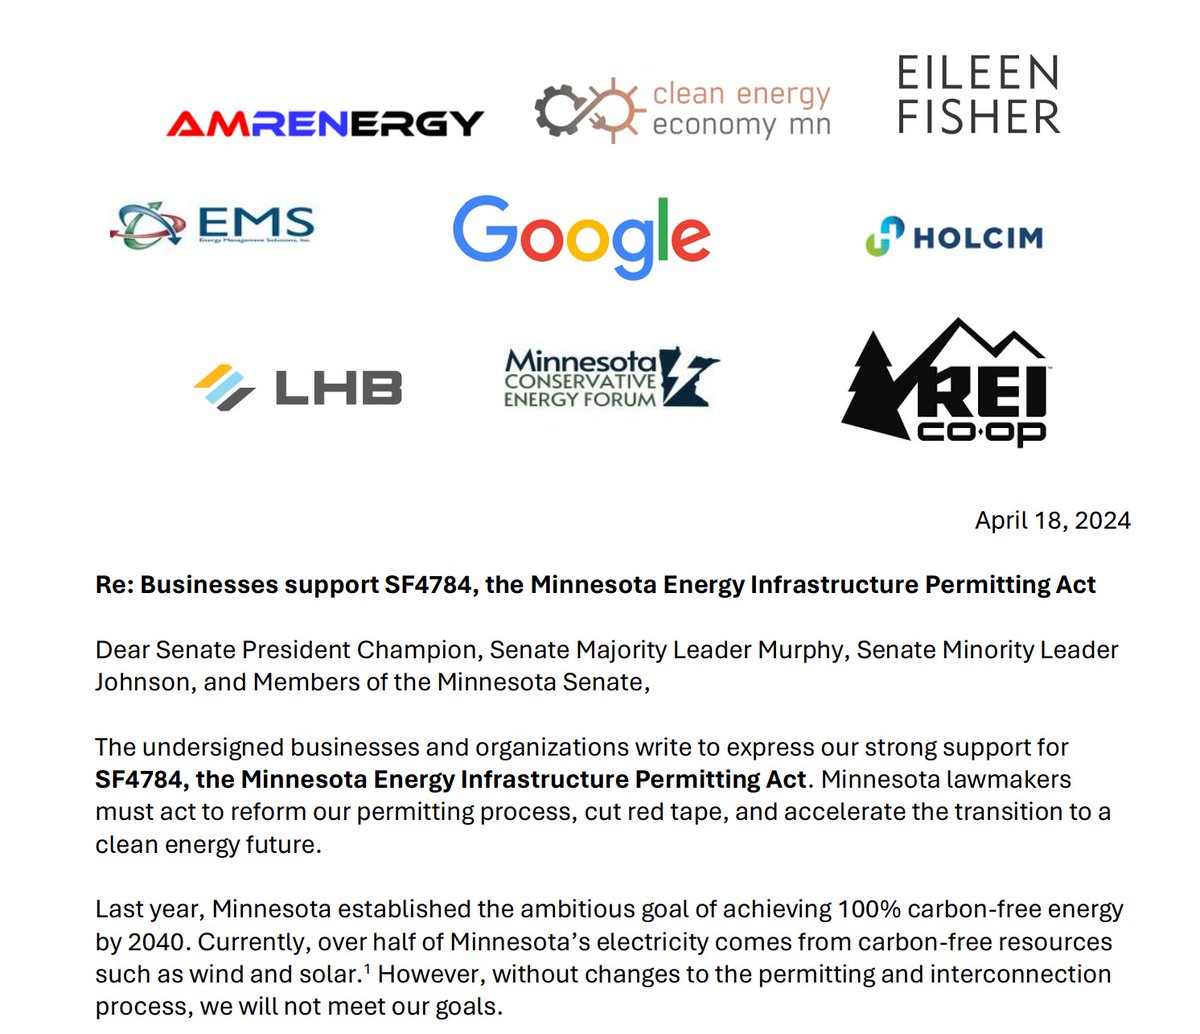 Inbox: In a new letter, Google and REI are among the companies urging the Legislature to pass the Senate version of the energy permitting bill that is on the floor right now: